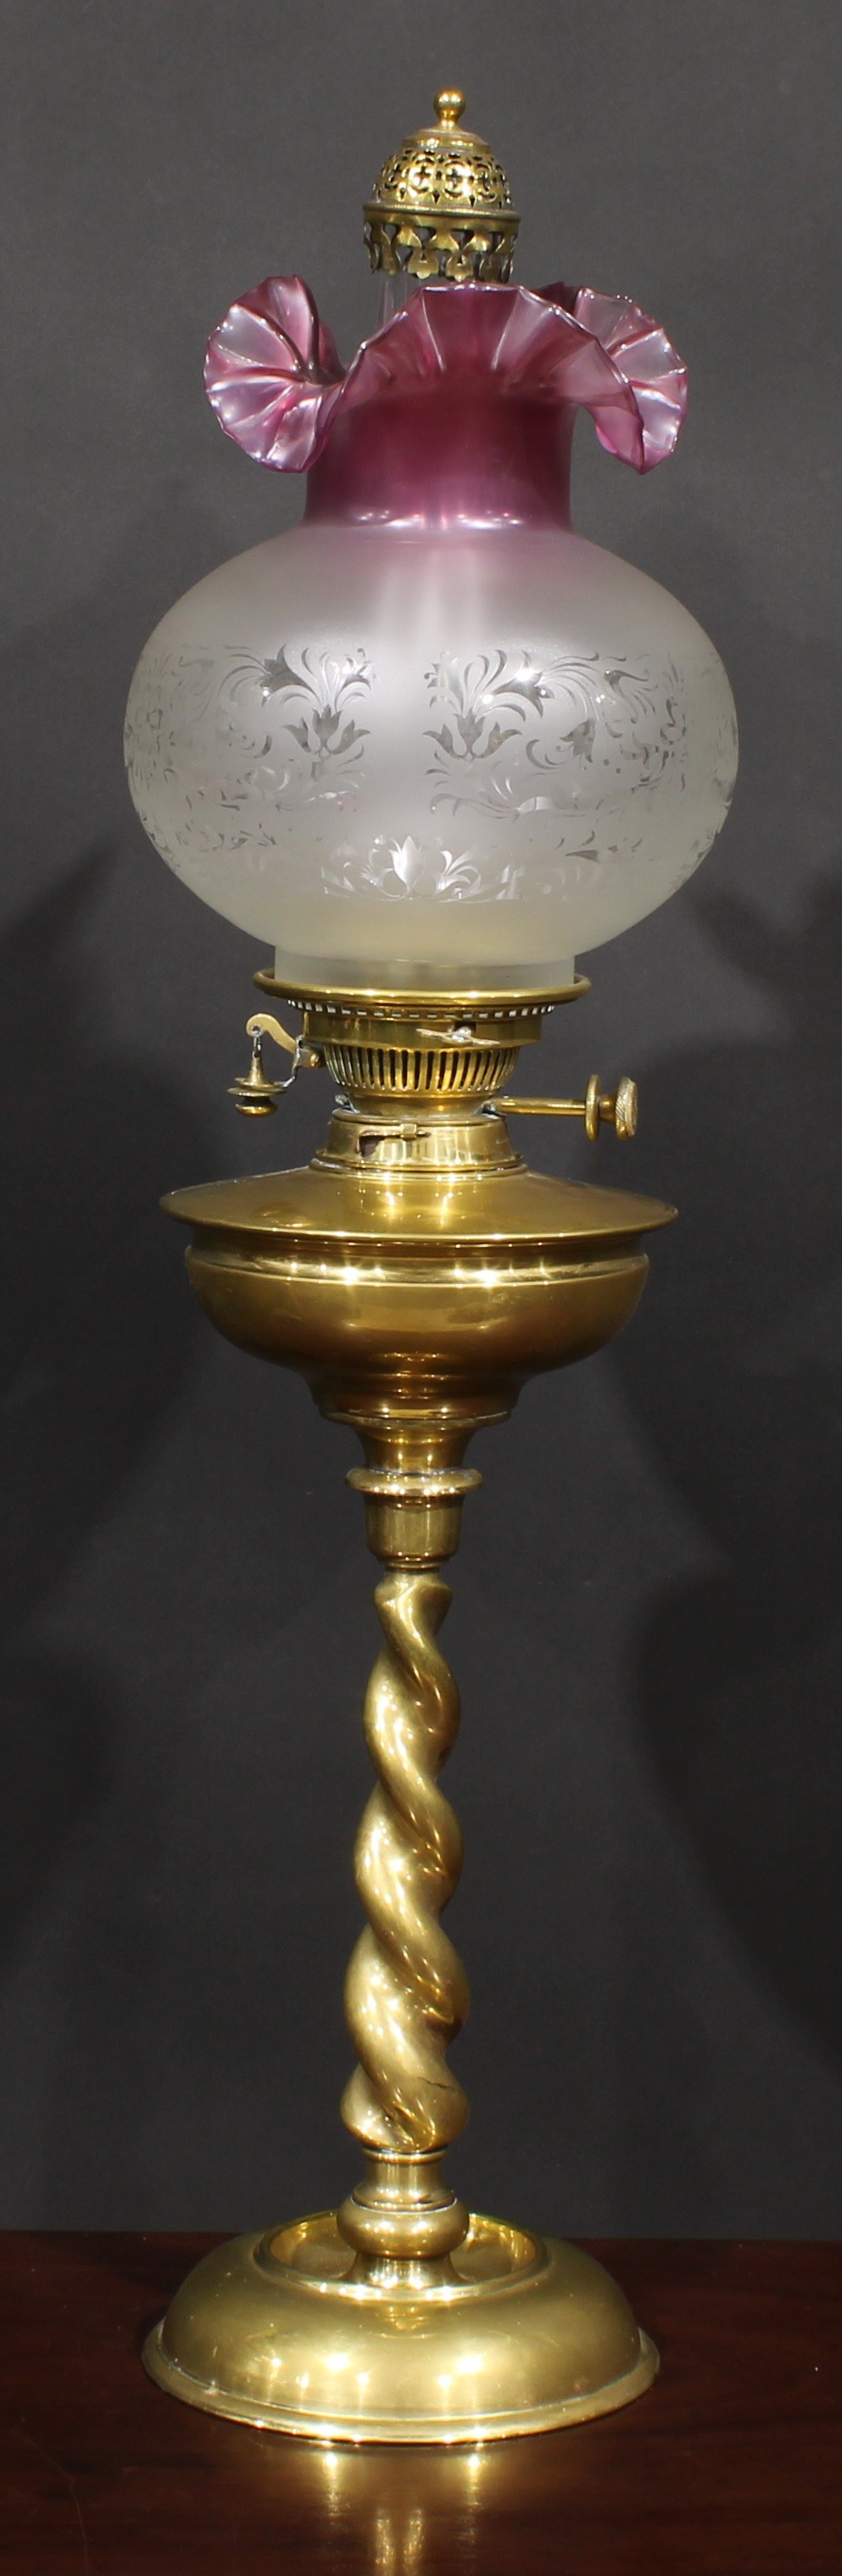 A 19th century brass oil lamp, circular brass font, Hinks's No.2 Duplex twin burner, frosted glass